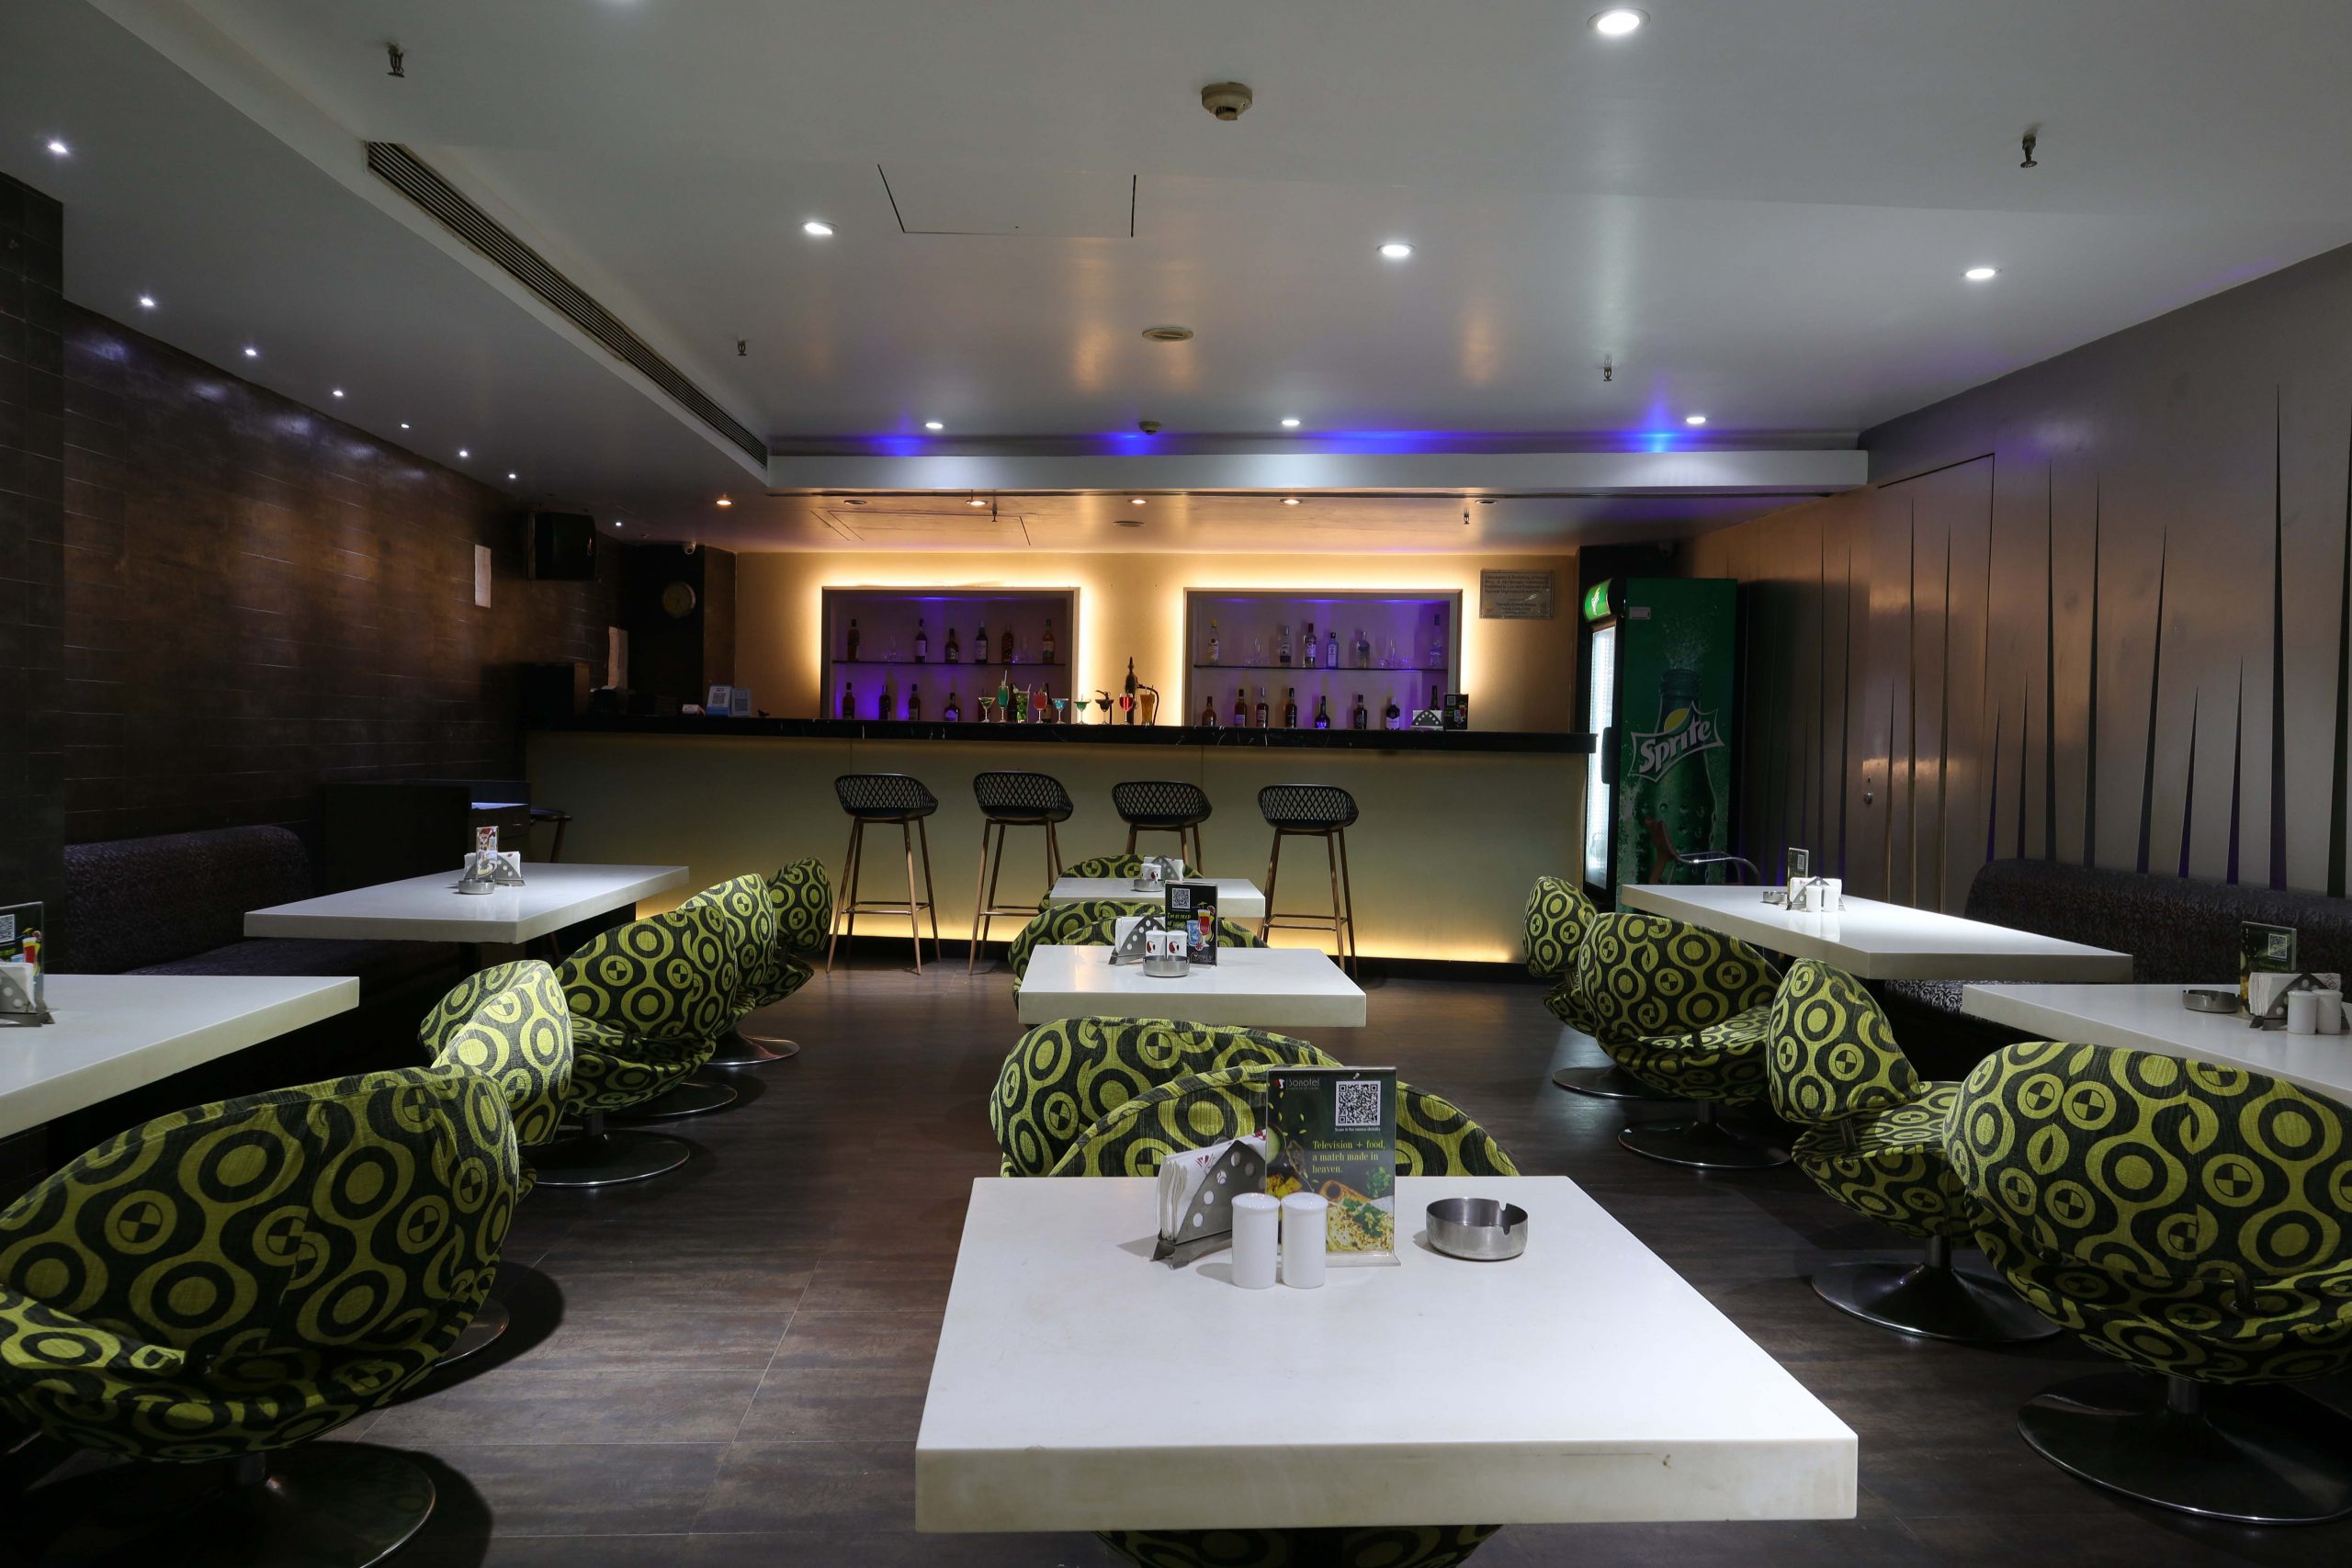 Pep Up- The Exclusive Bar at Sonotel - Image 2